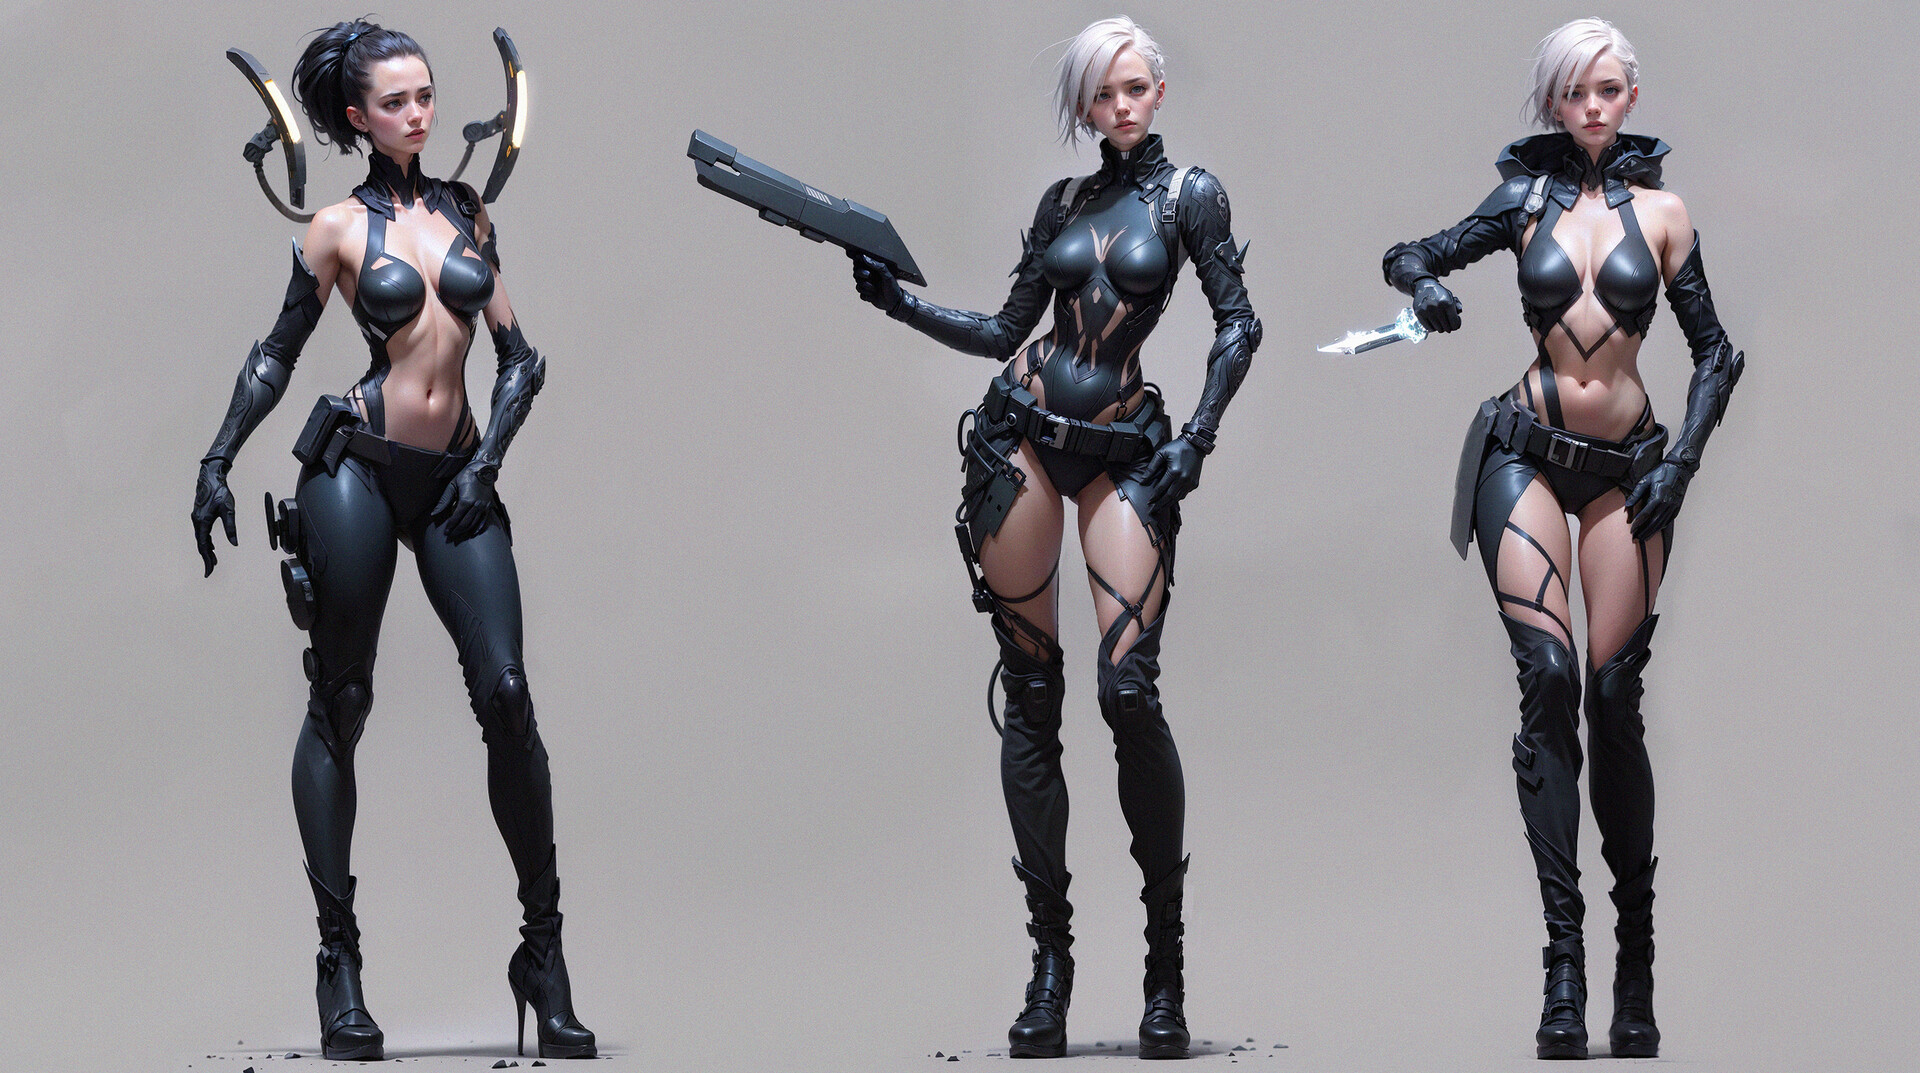 General 1920x1073 women skimpy clothes looking at viewer high heels silver hair drawing standing weapon concept art simple background minimalism Eugen Ich